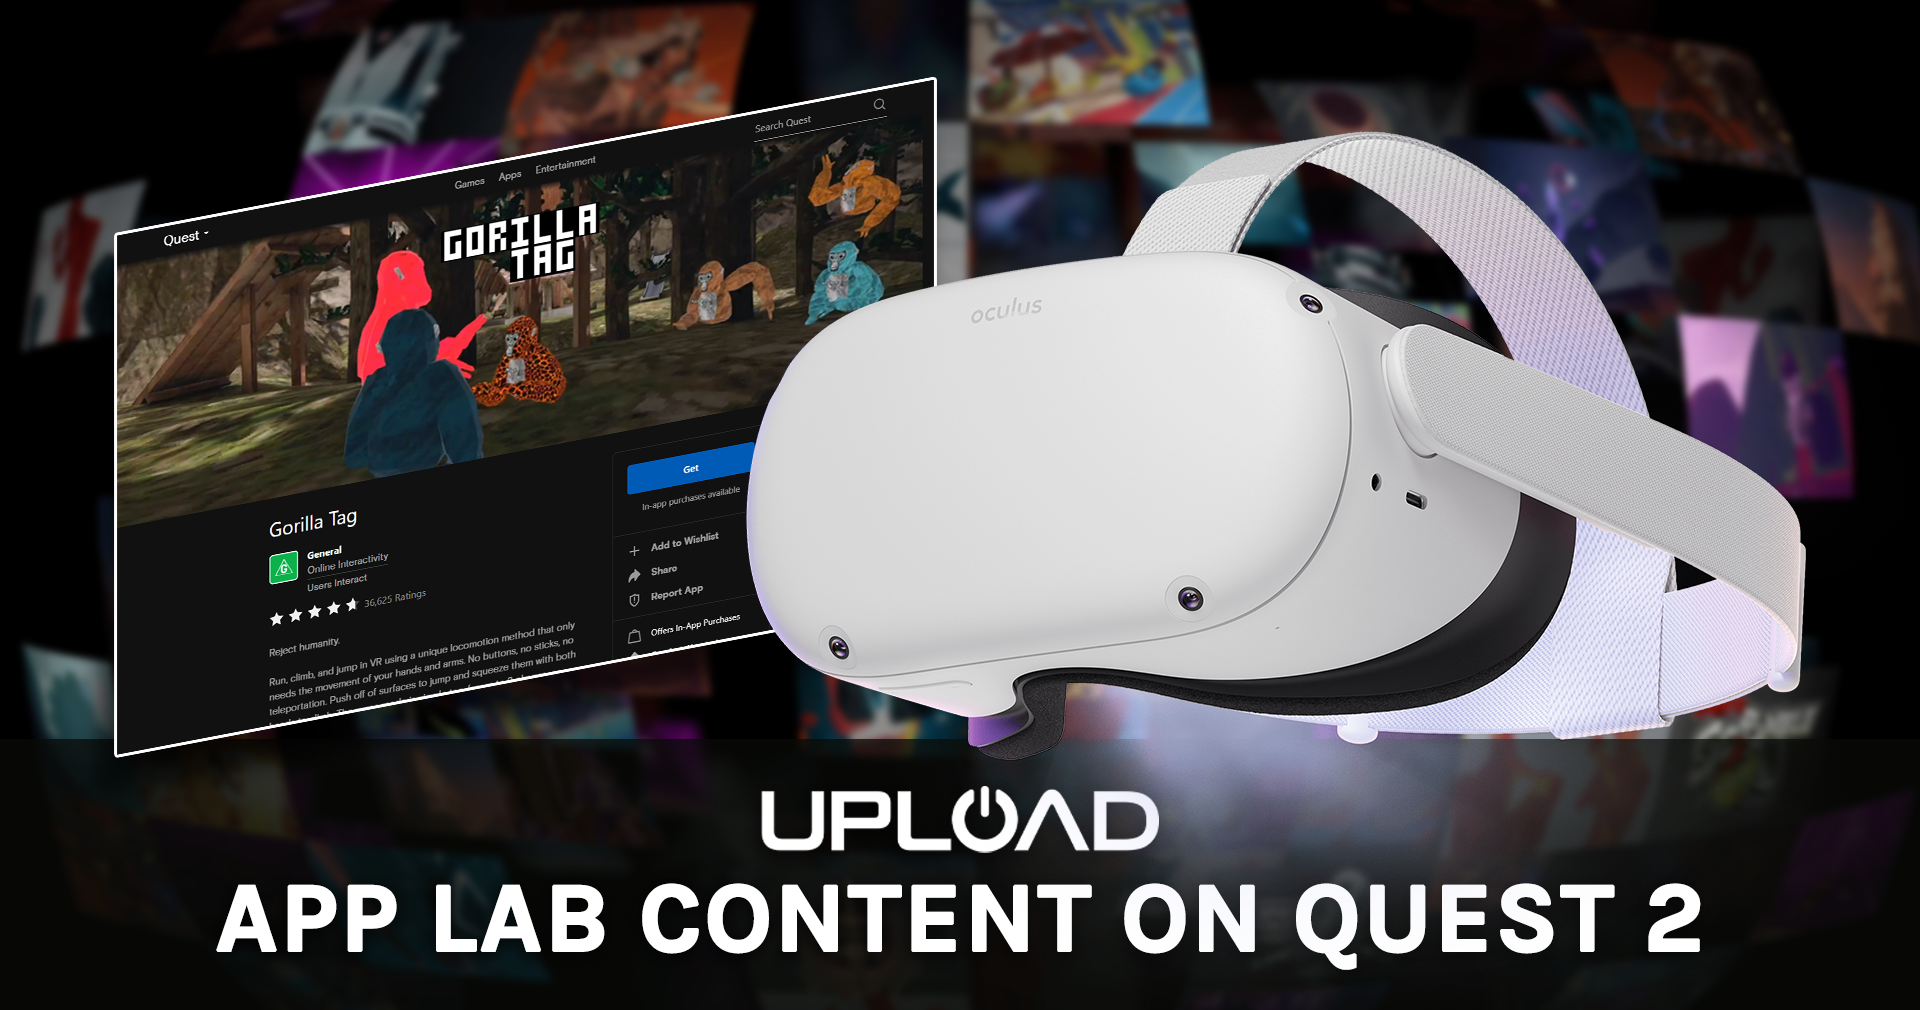 Find and Install APP LAB GAMES LIKE GORILLA TAG - NO PC NO PHONE NEEED  Oculus Quest and Quest 2 